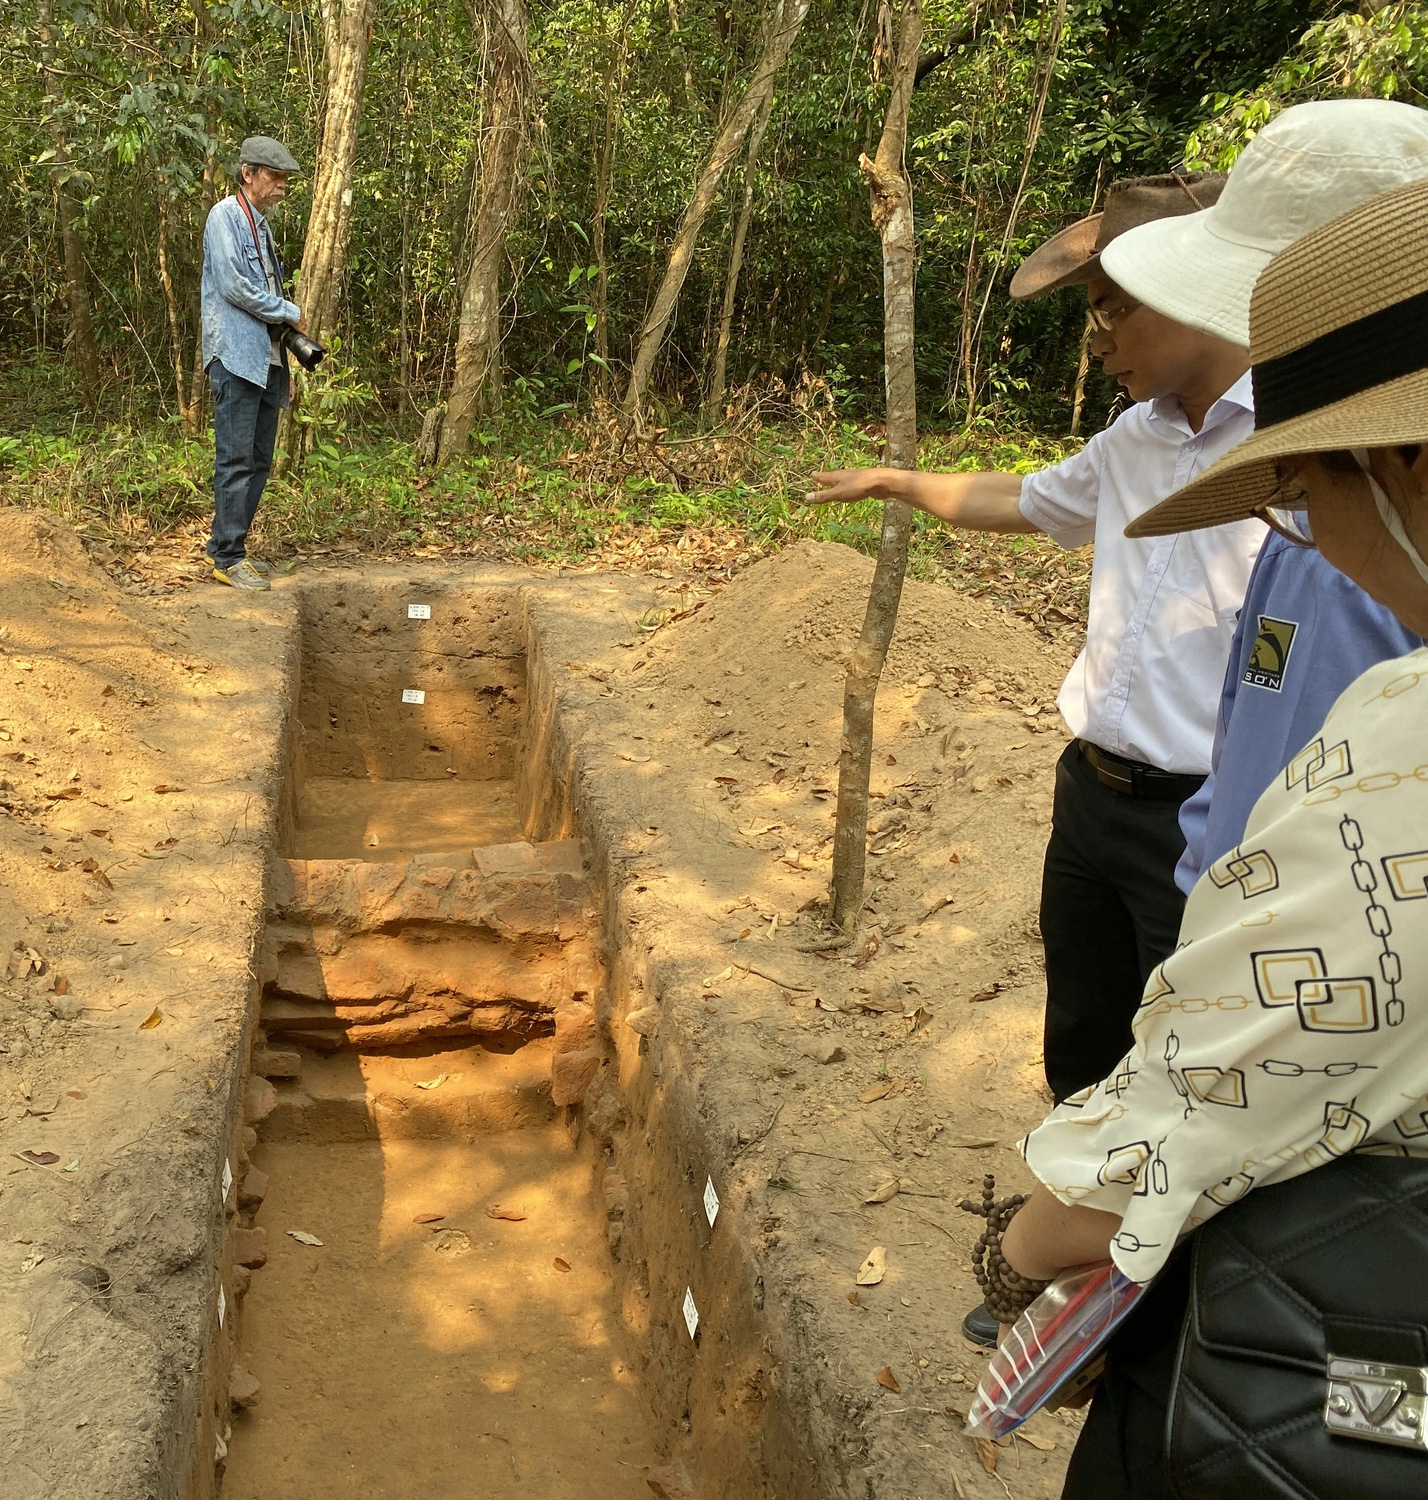 A segment of the new path unveiled during a recent excavation at My Son Sanctuary, a UNESCO World Heritage site in Quang Nam Province, central Vietnam. Photo: B.D. / Tuoi Tre